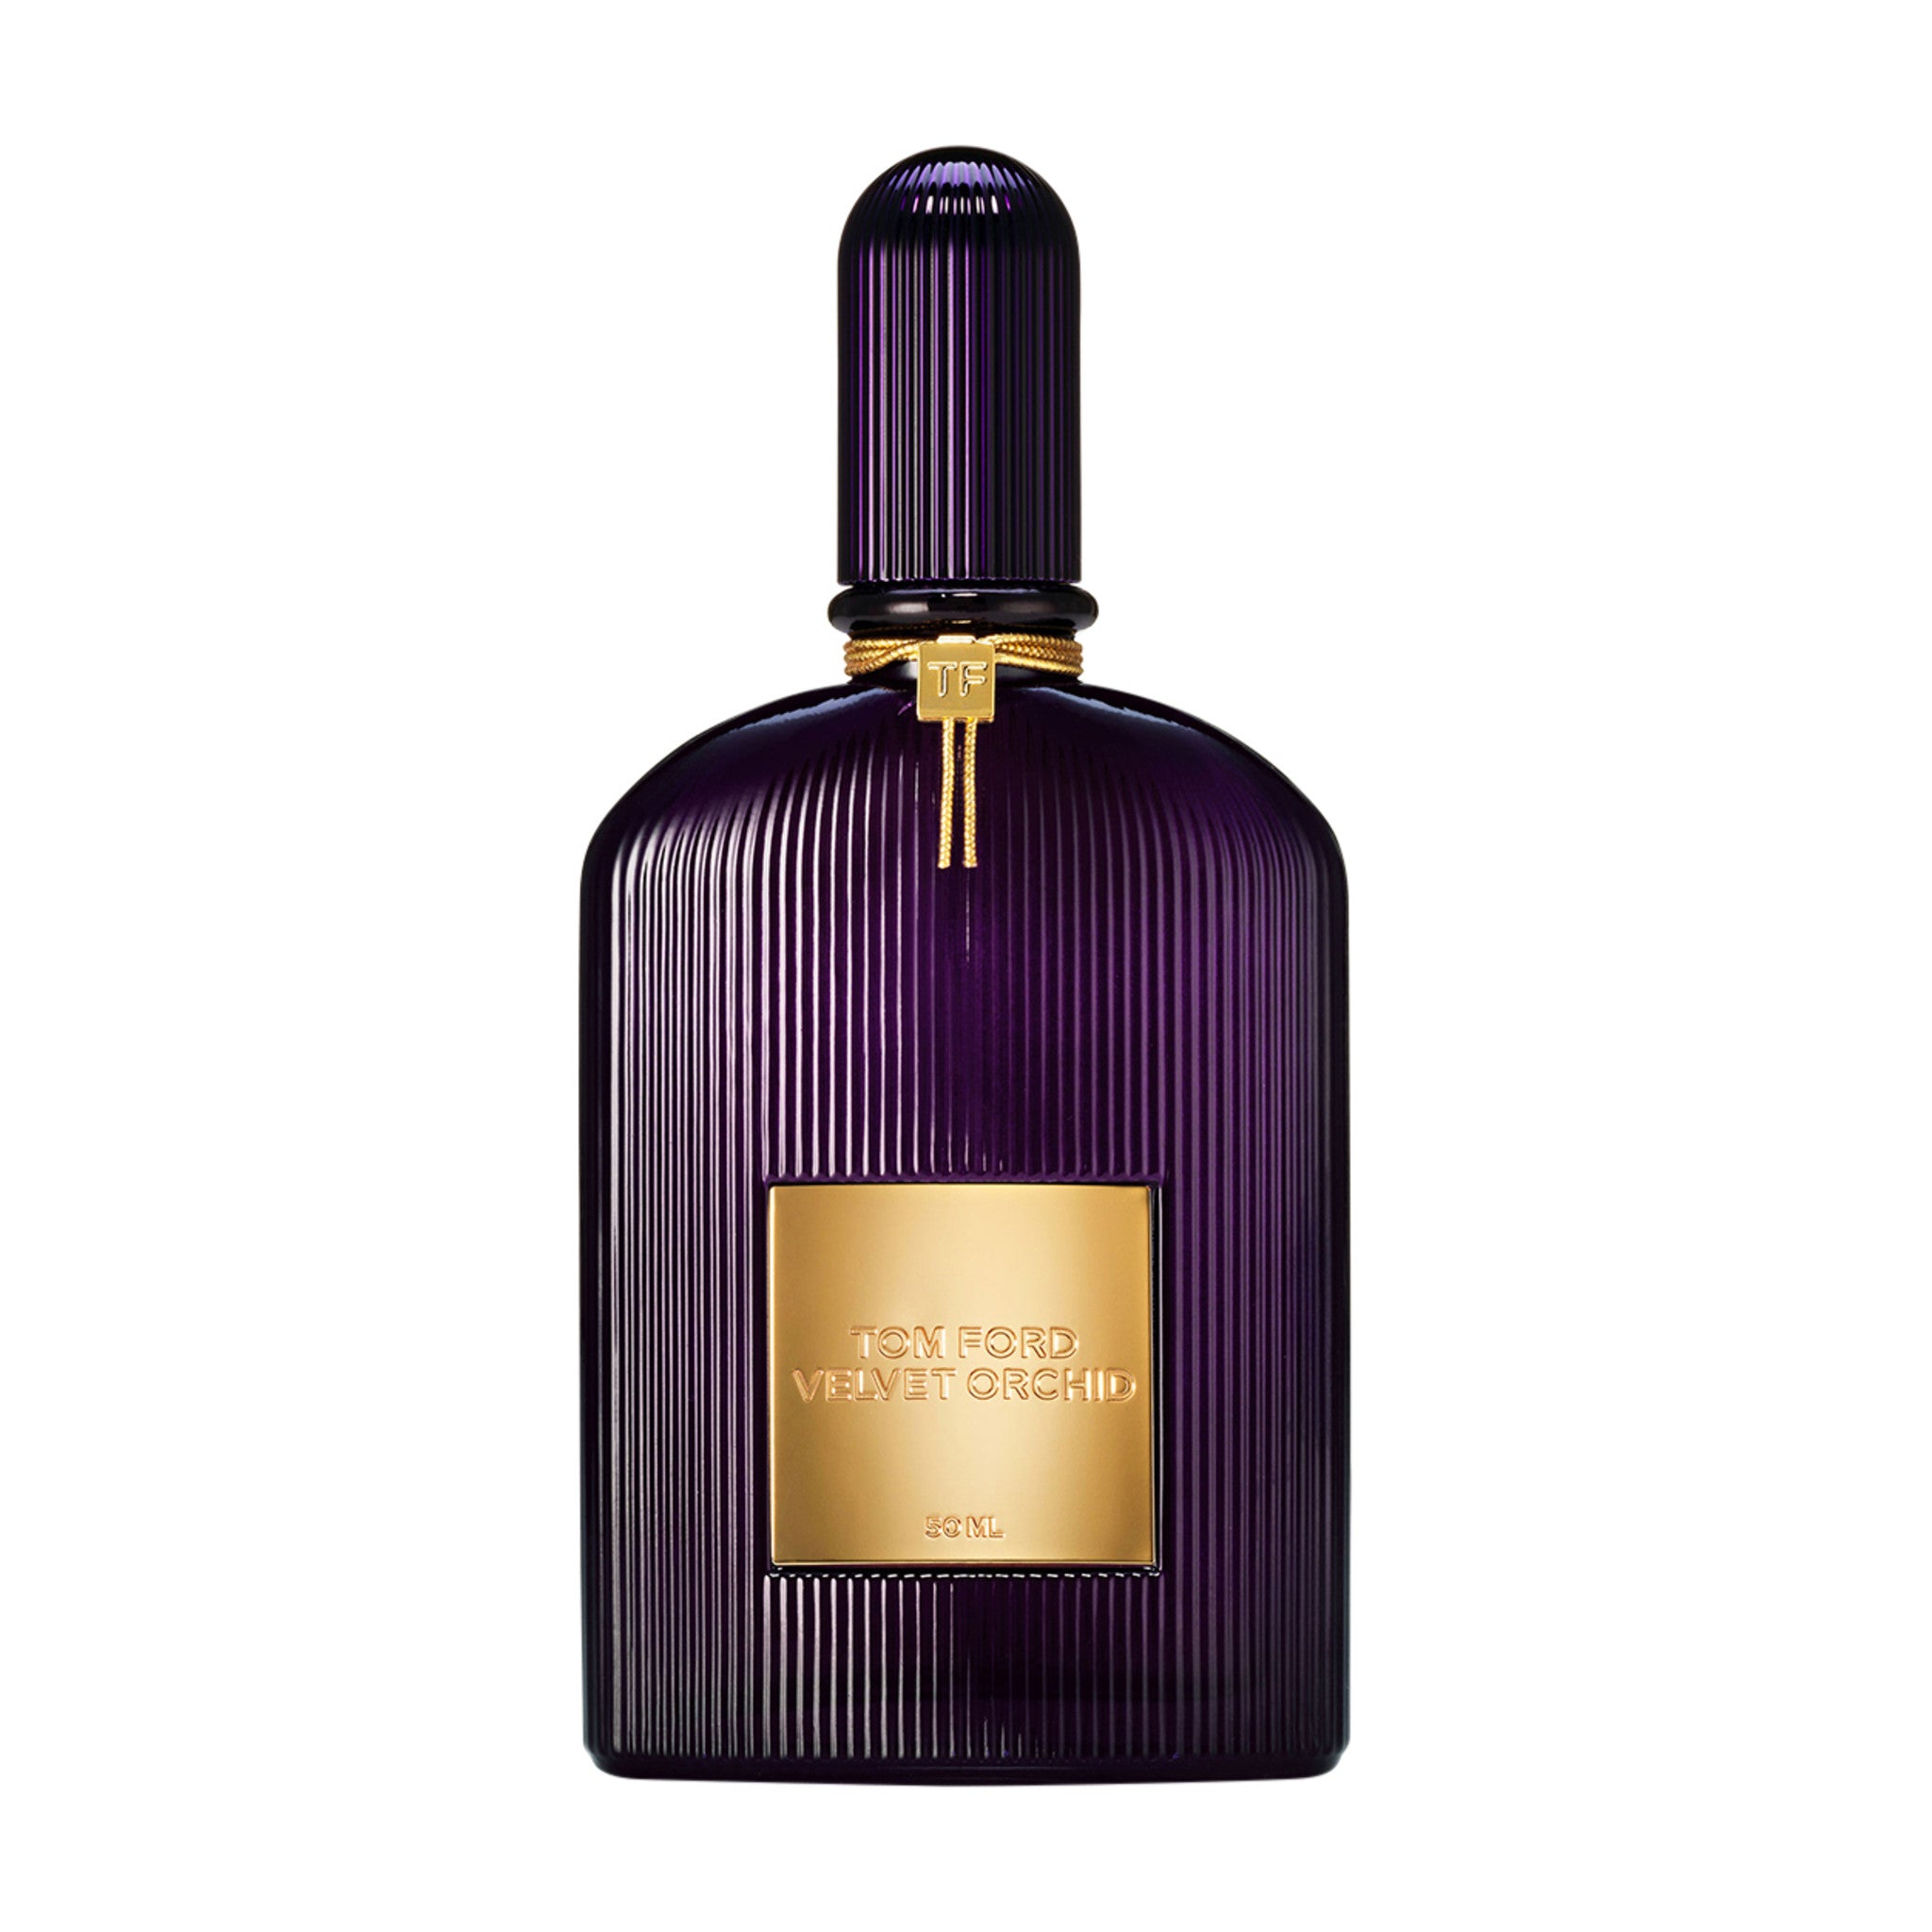 15 Indulgent Louis Vuitton Perfumes For a New Signature Scent in